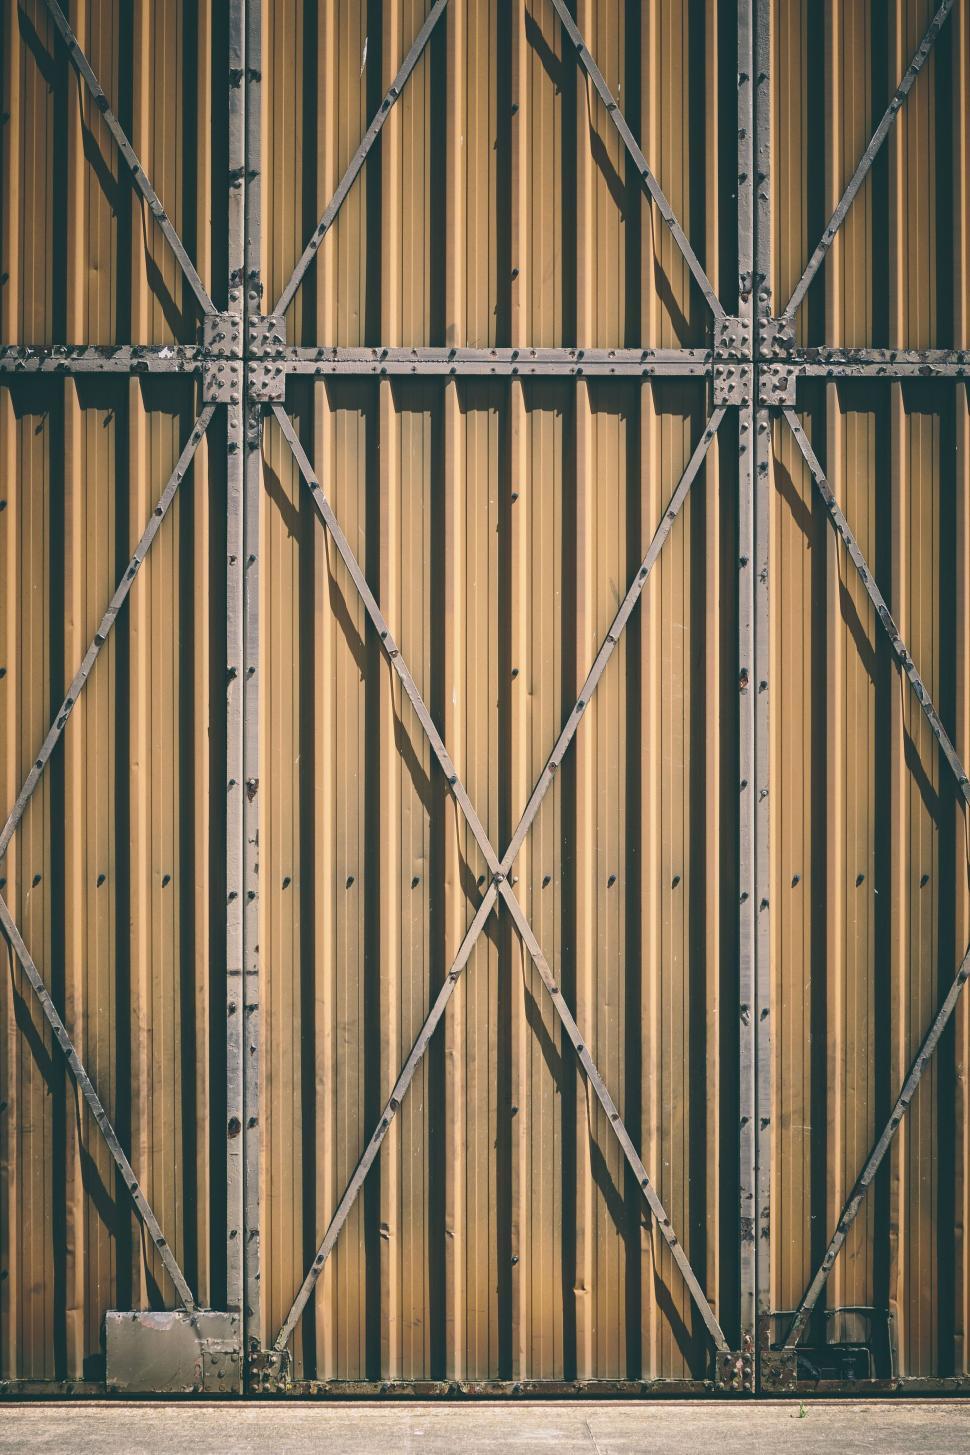 Free Image of Buildings Buildings bamboo worm fence 